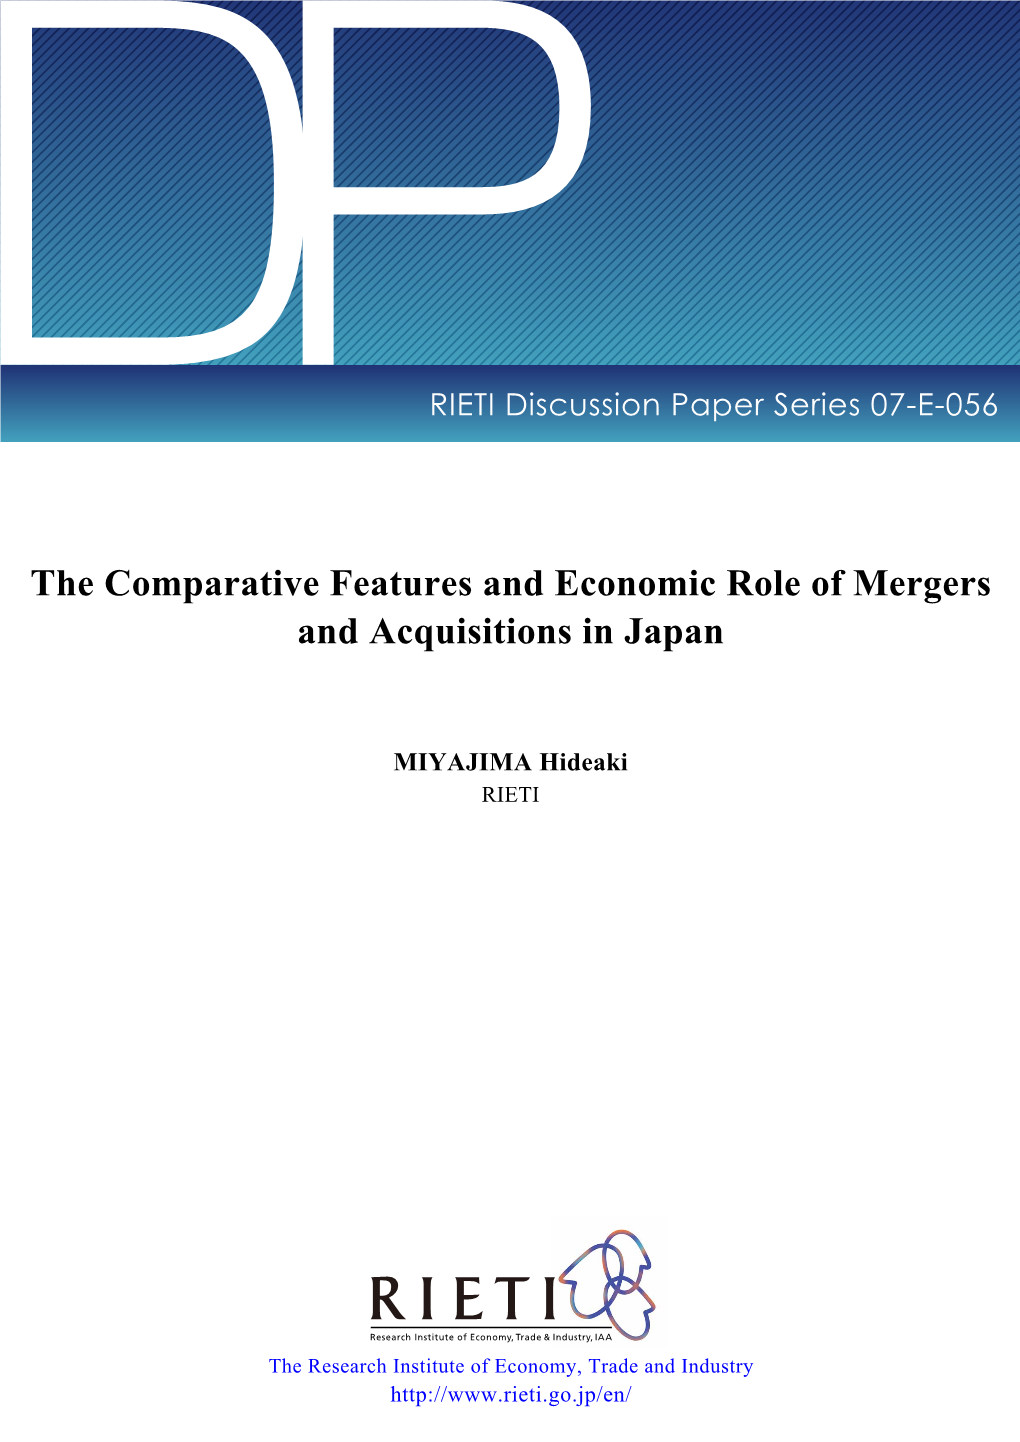 The Comparative Features and Economic Role of Mergers and Acquisitions in Japan